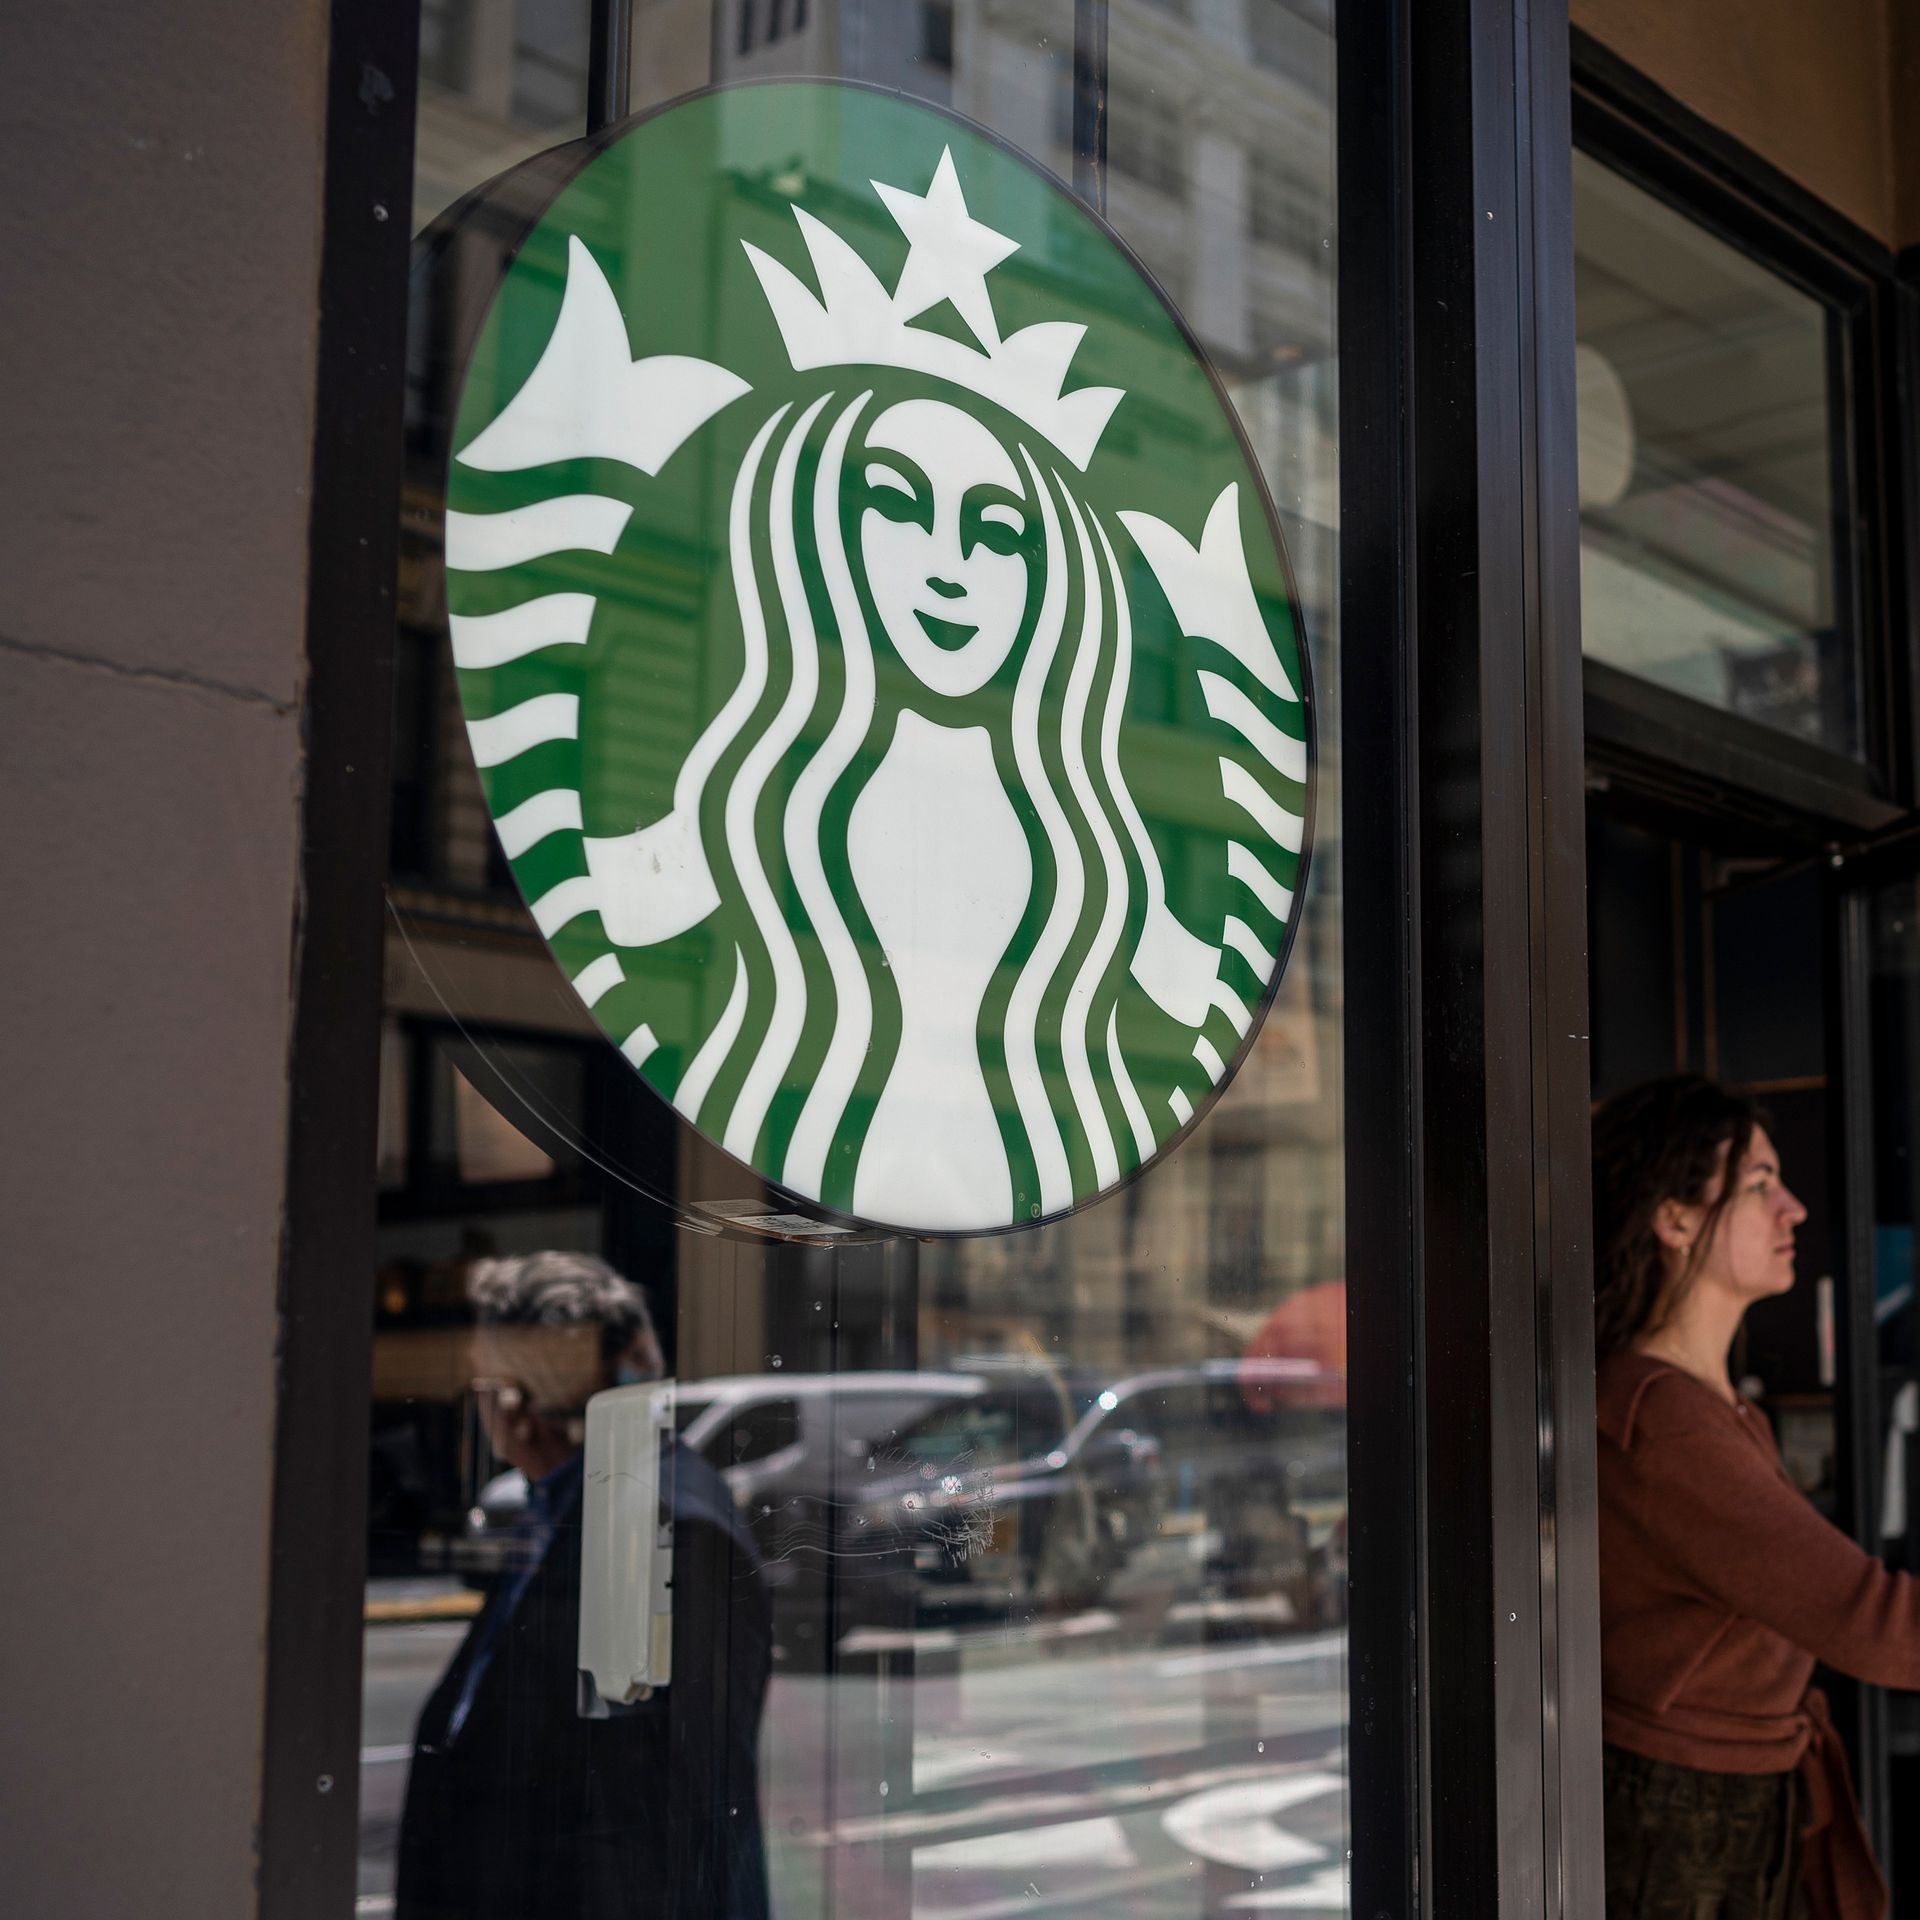 Picture of the Starbucks logo in a location, with a person walking out